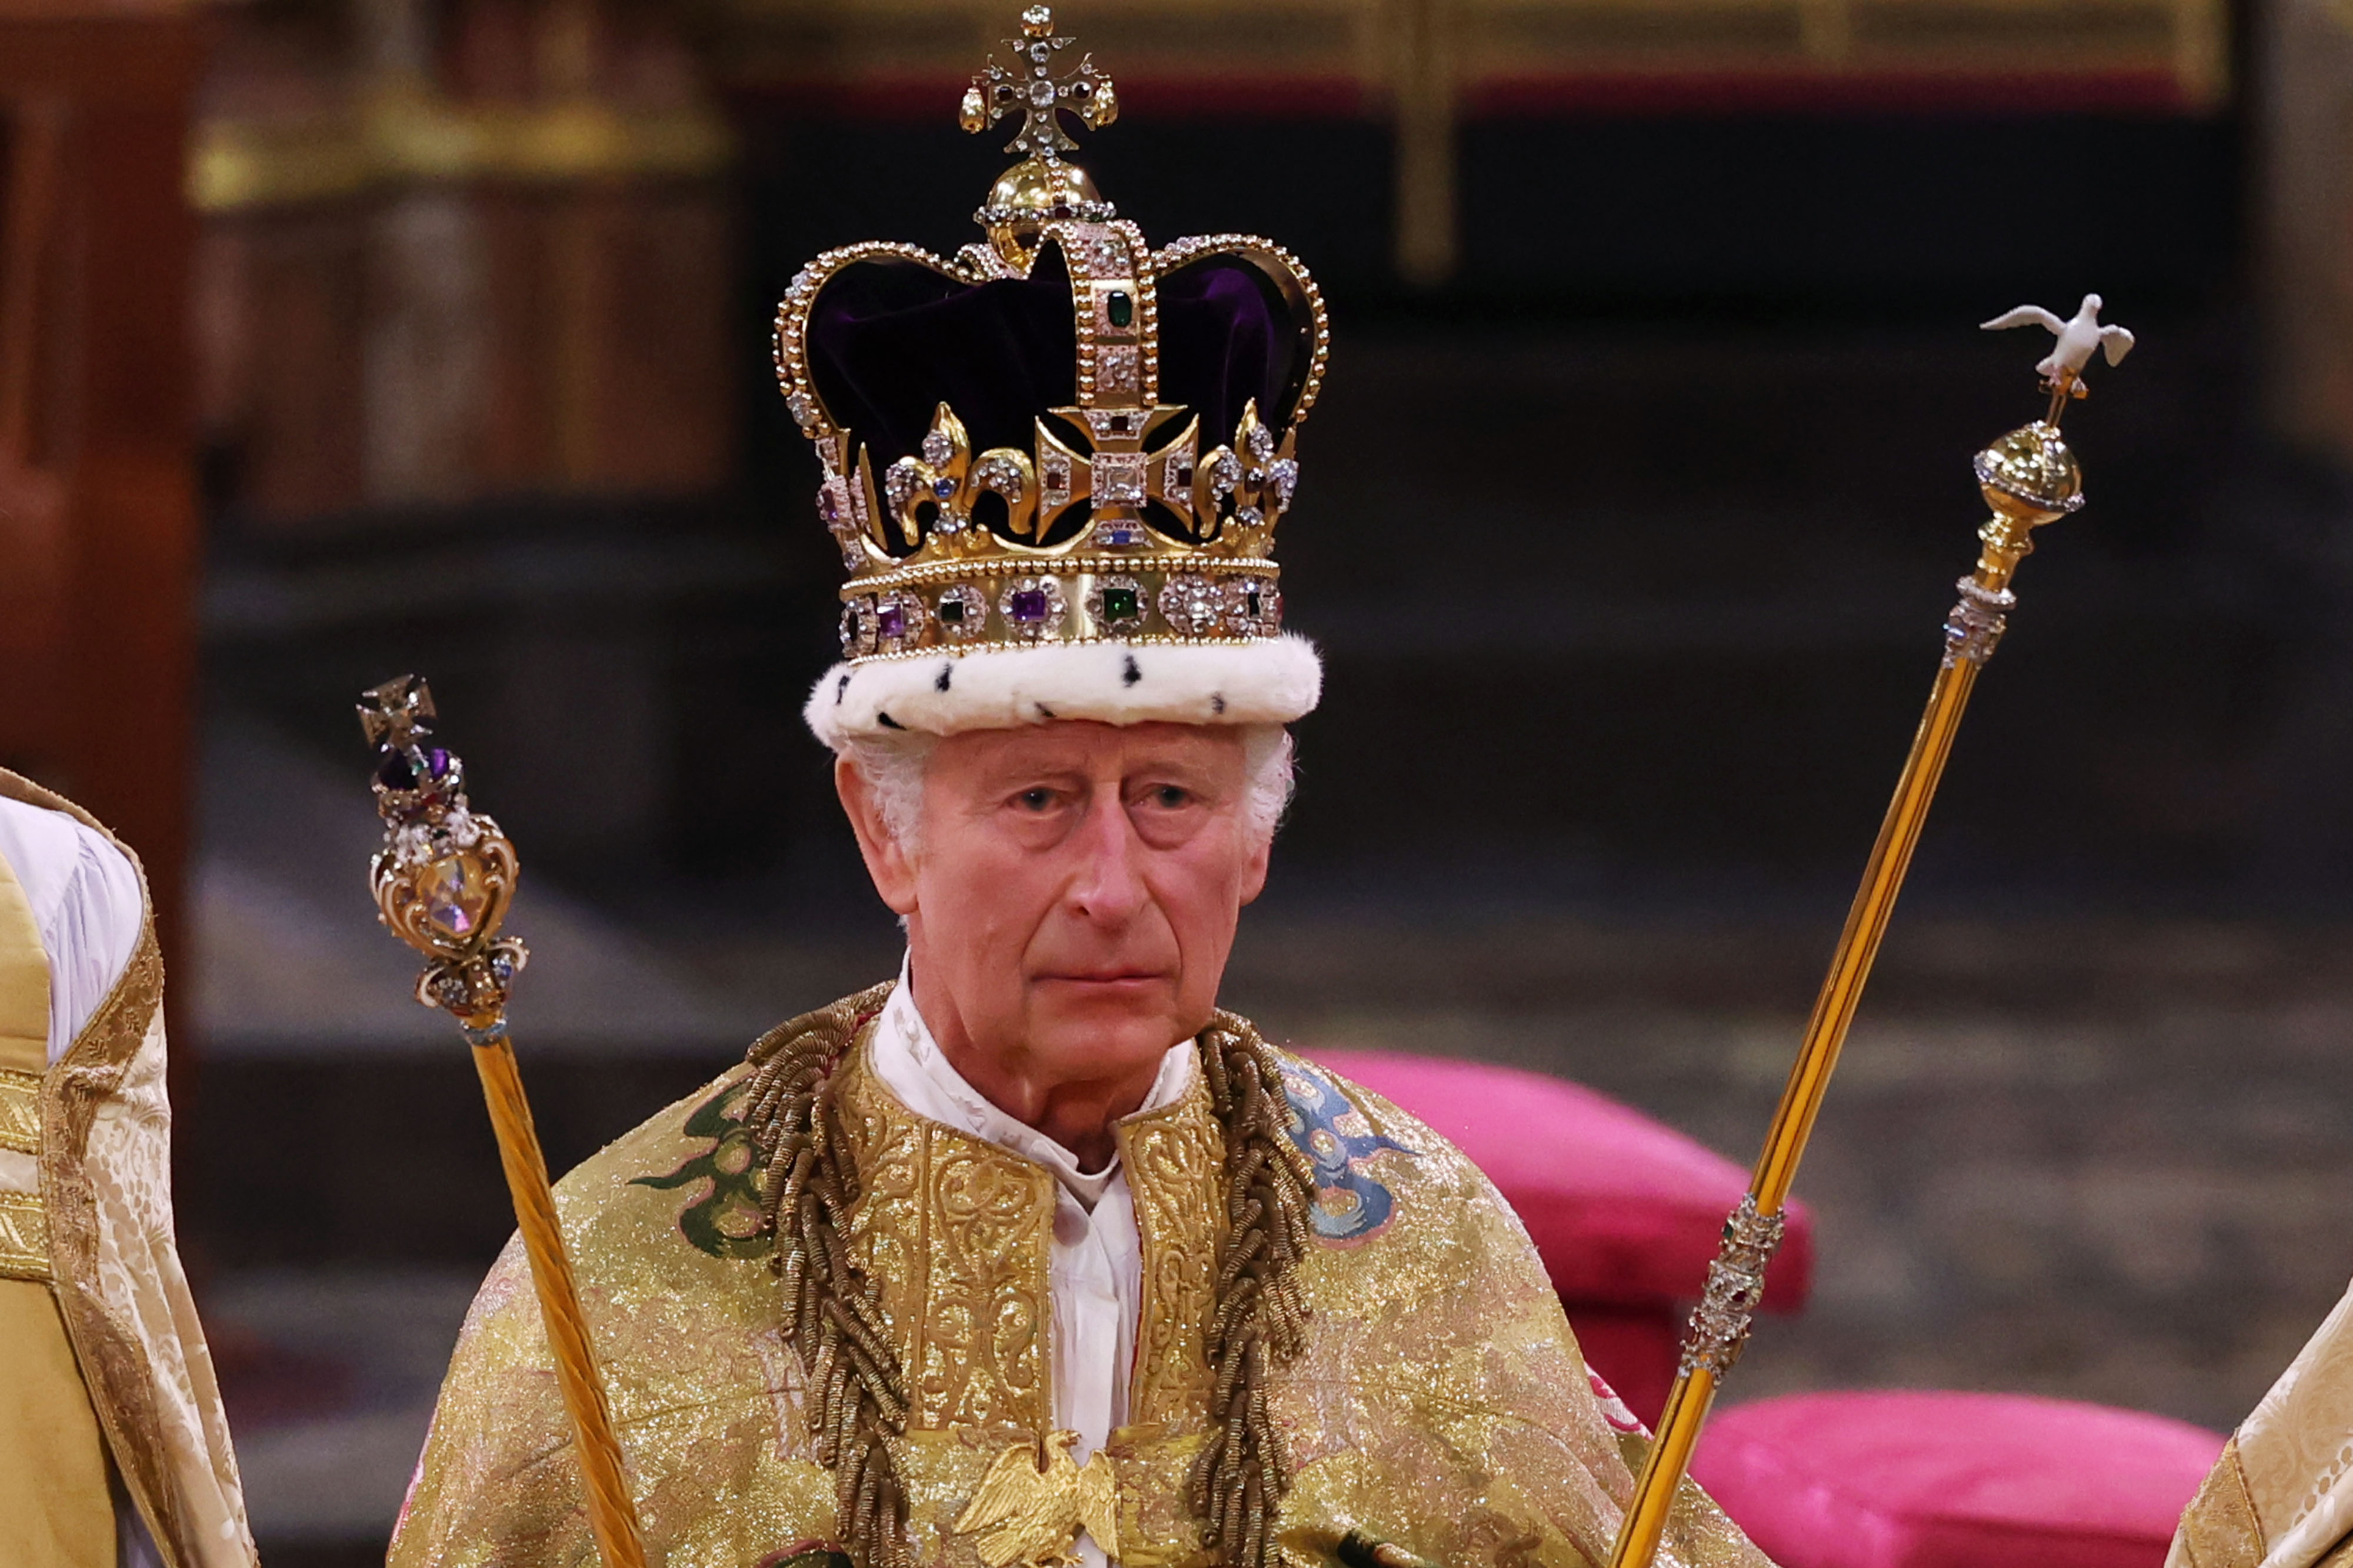 King Charles III after his Coronation in London, England, on May 6, 2023. | Source: Getty Images